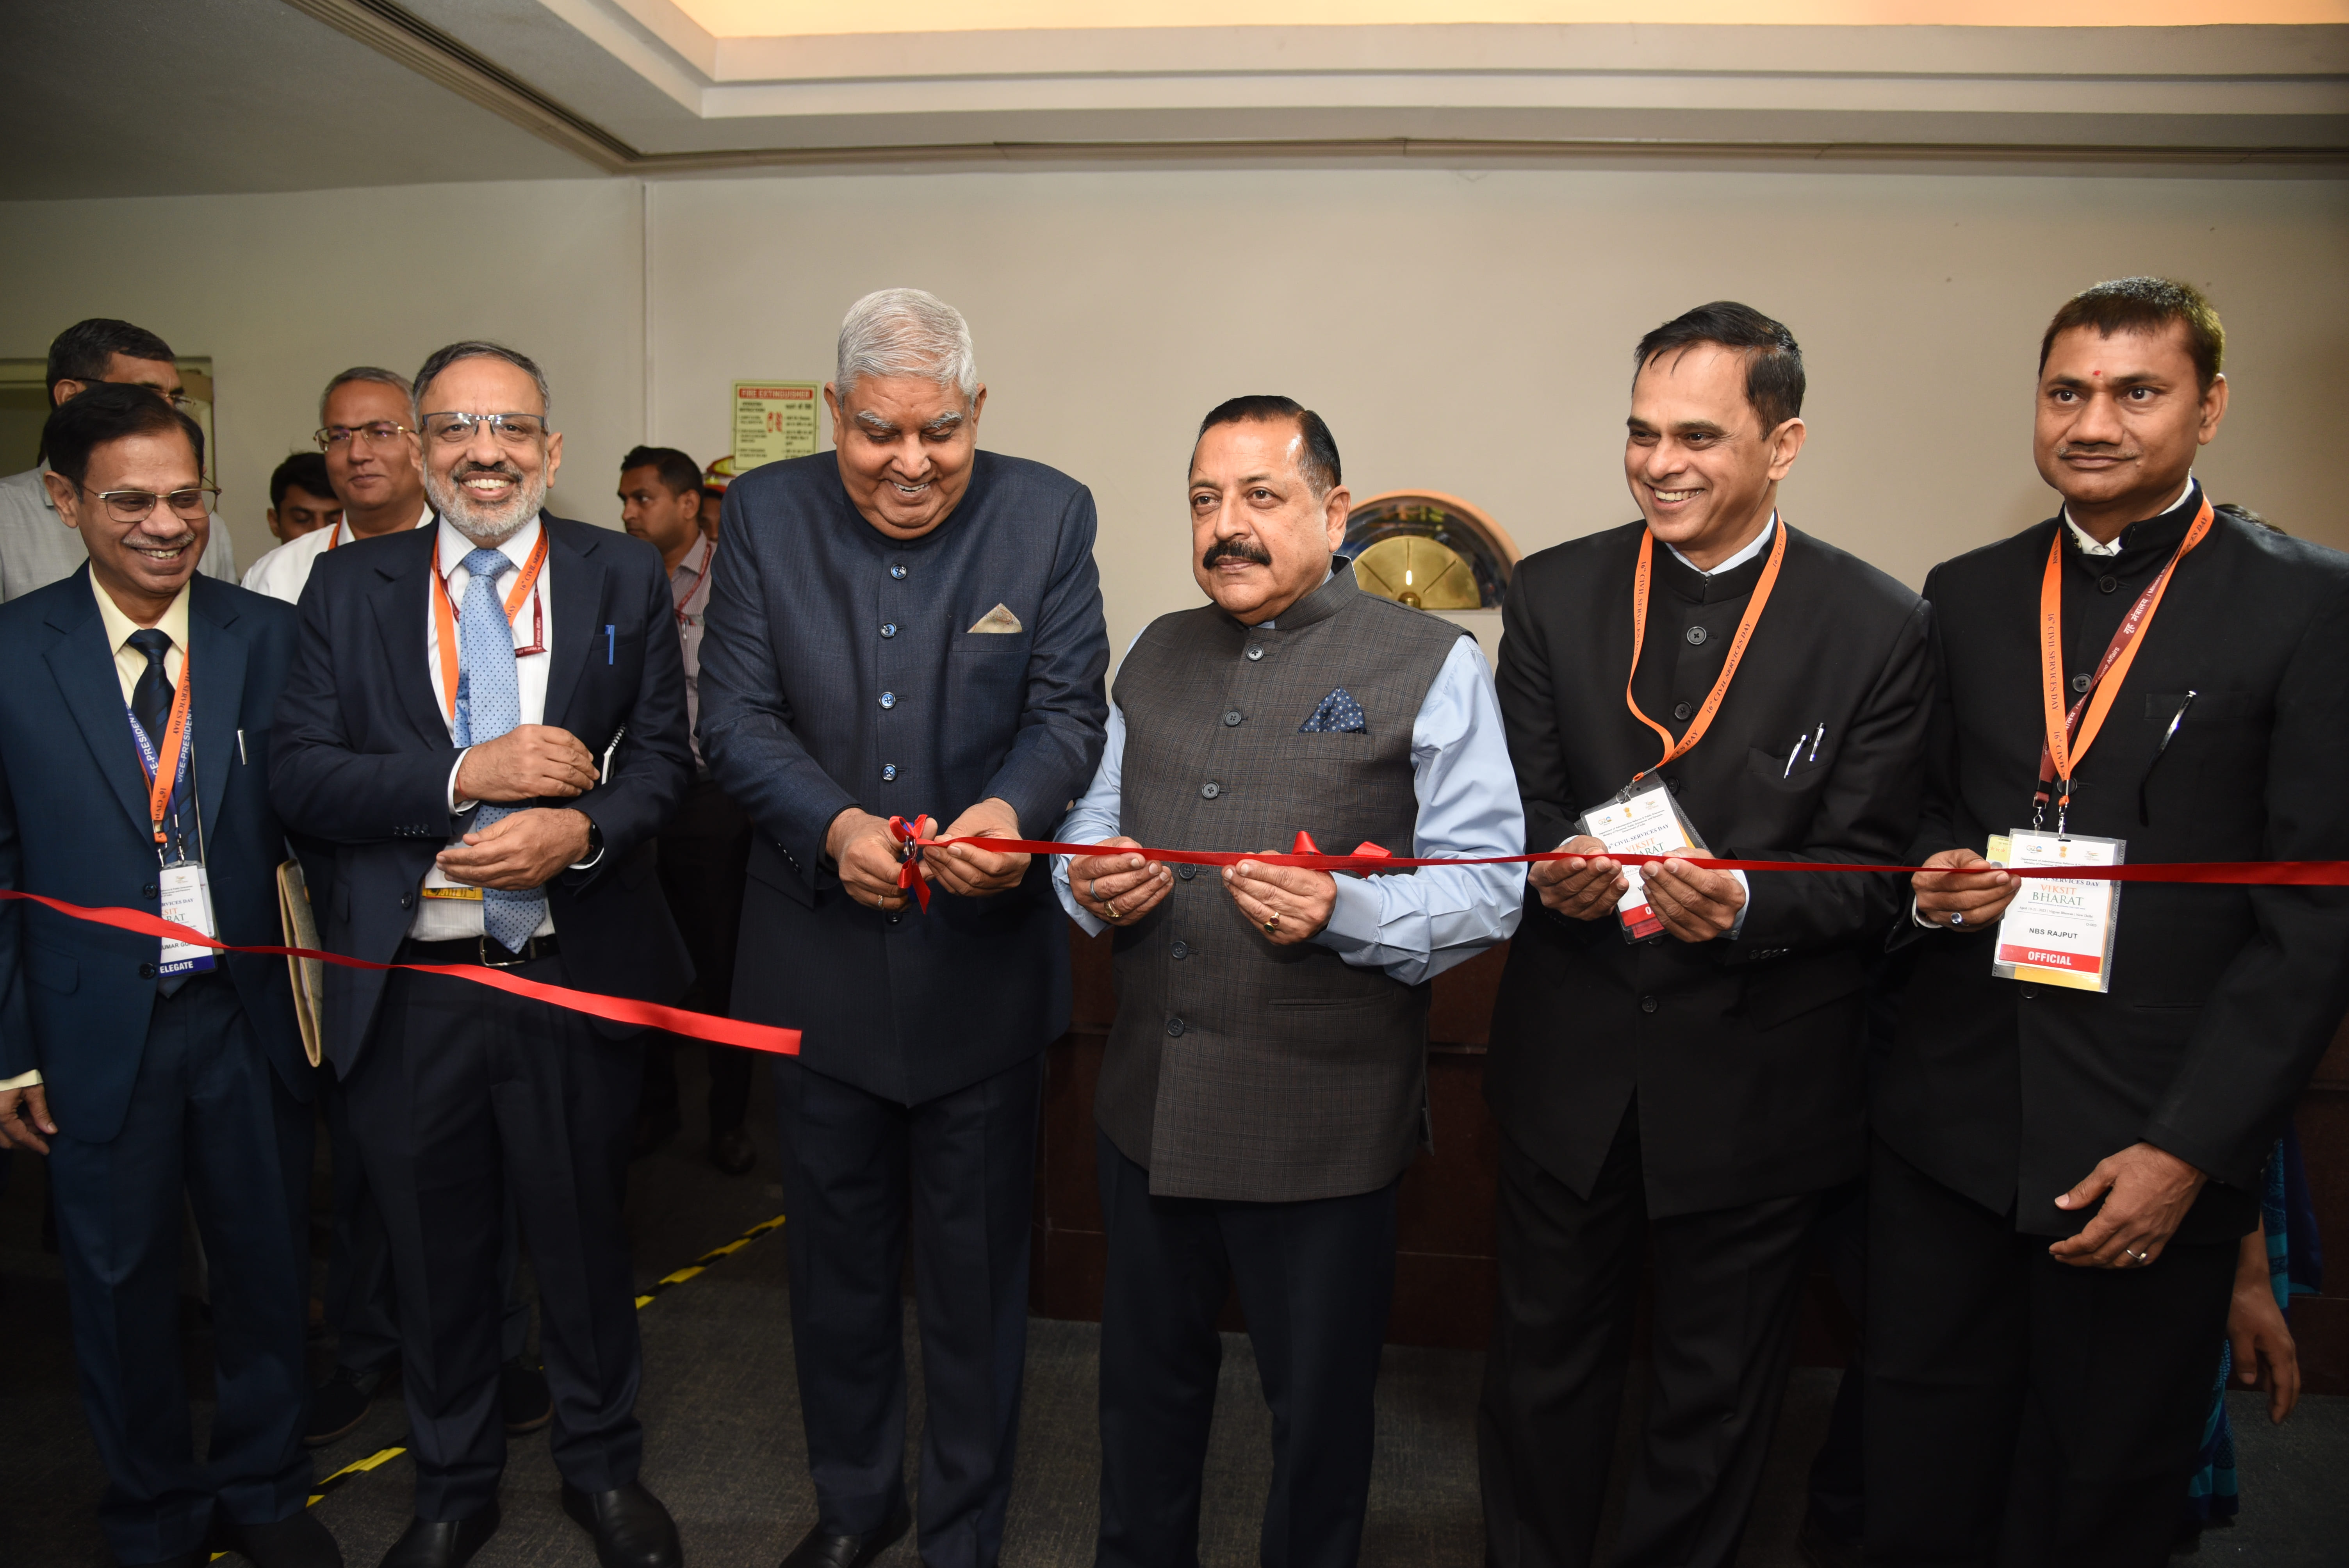 The Vice President, Shri Jagdeep Dhankhar inaugurated the exhibition on 'Good Governance Practices in India - Awarded Initiatives' during the 16th Civil Services Day celebrations at Vigyan Bhawan in New Delhi on April 20, 2023.